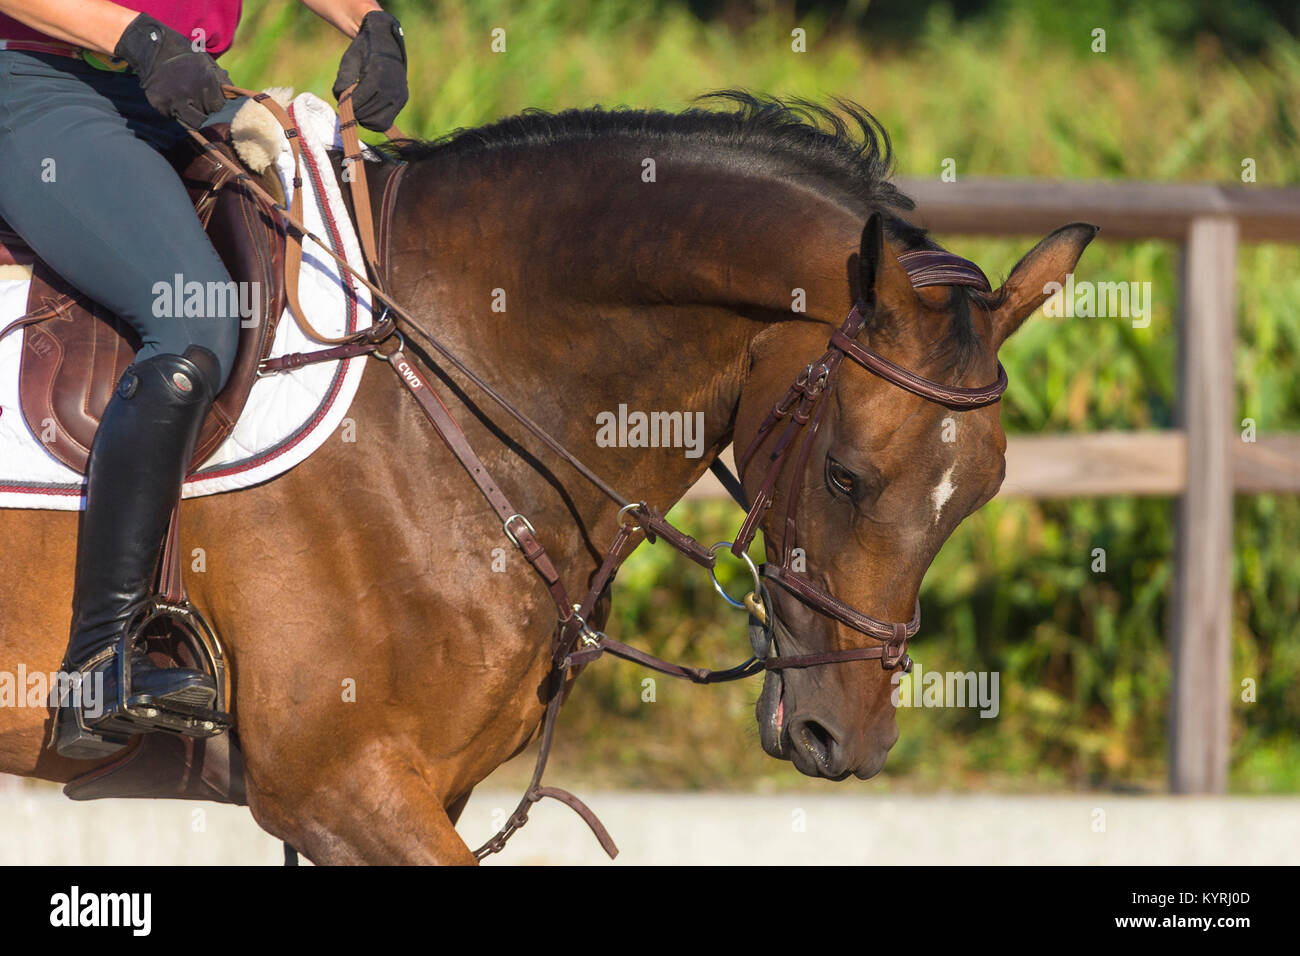 Dutch Warmblood. Rider schooling a bay horse, communicating with reins. Netherlands Stock Photo